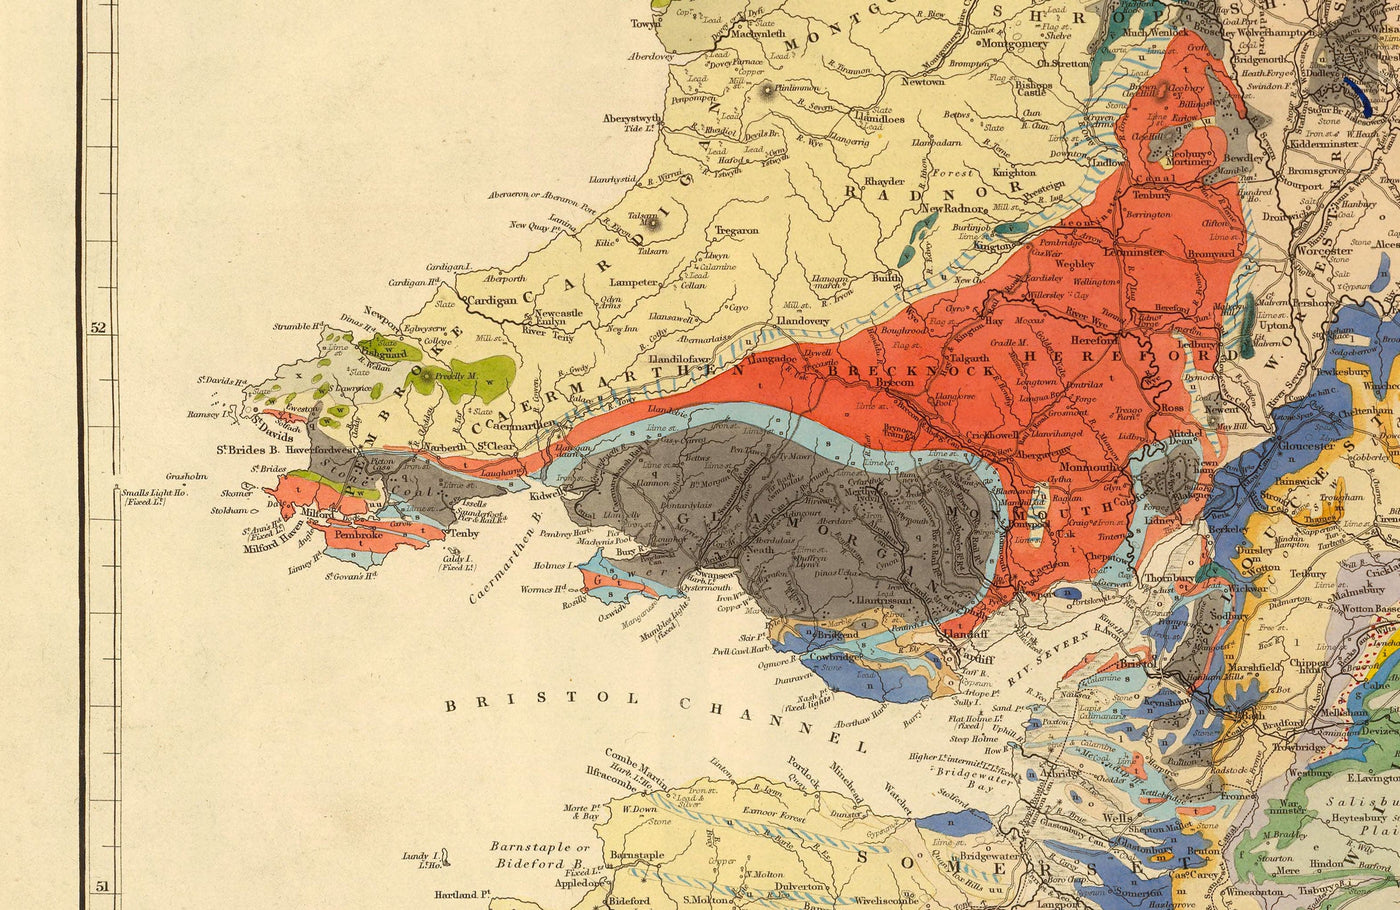 Old Geology & Railway Map of England and Wales, 1834 - Geologist Map